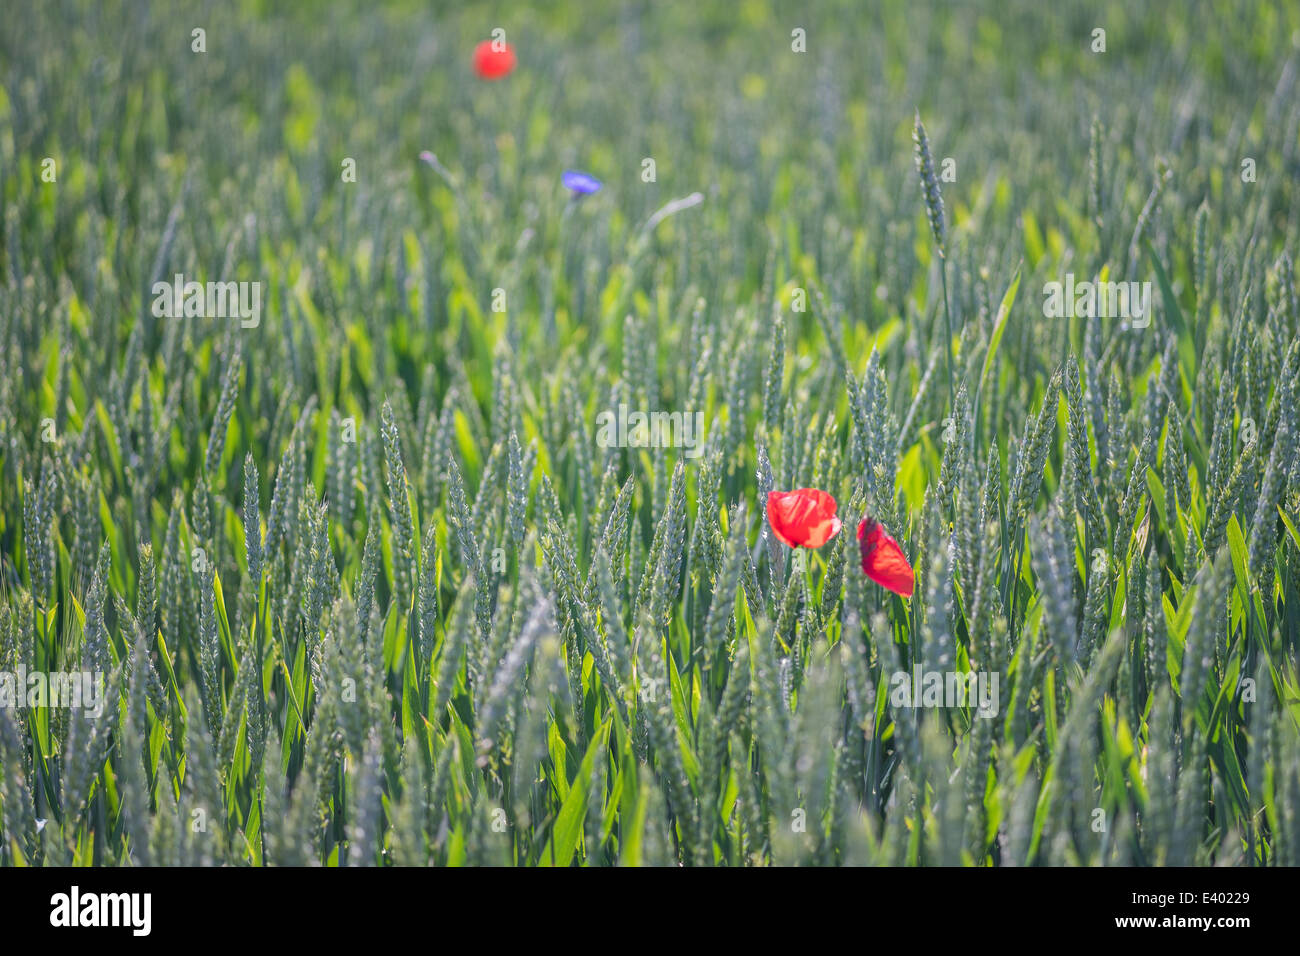 Green wheat and blooming red poppies Stock Photo